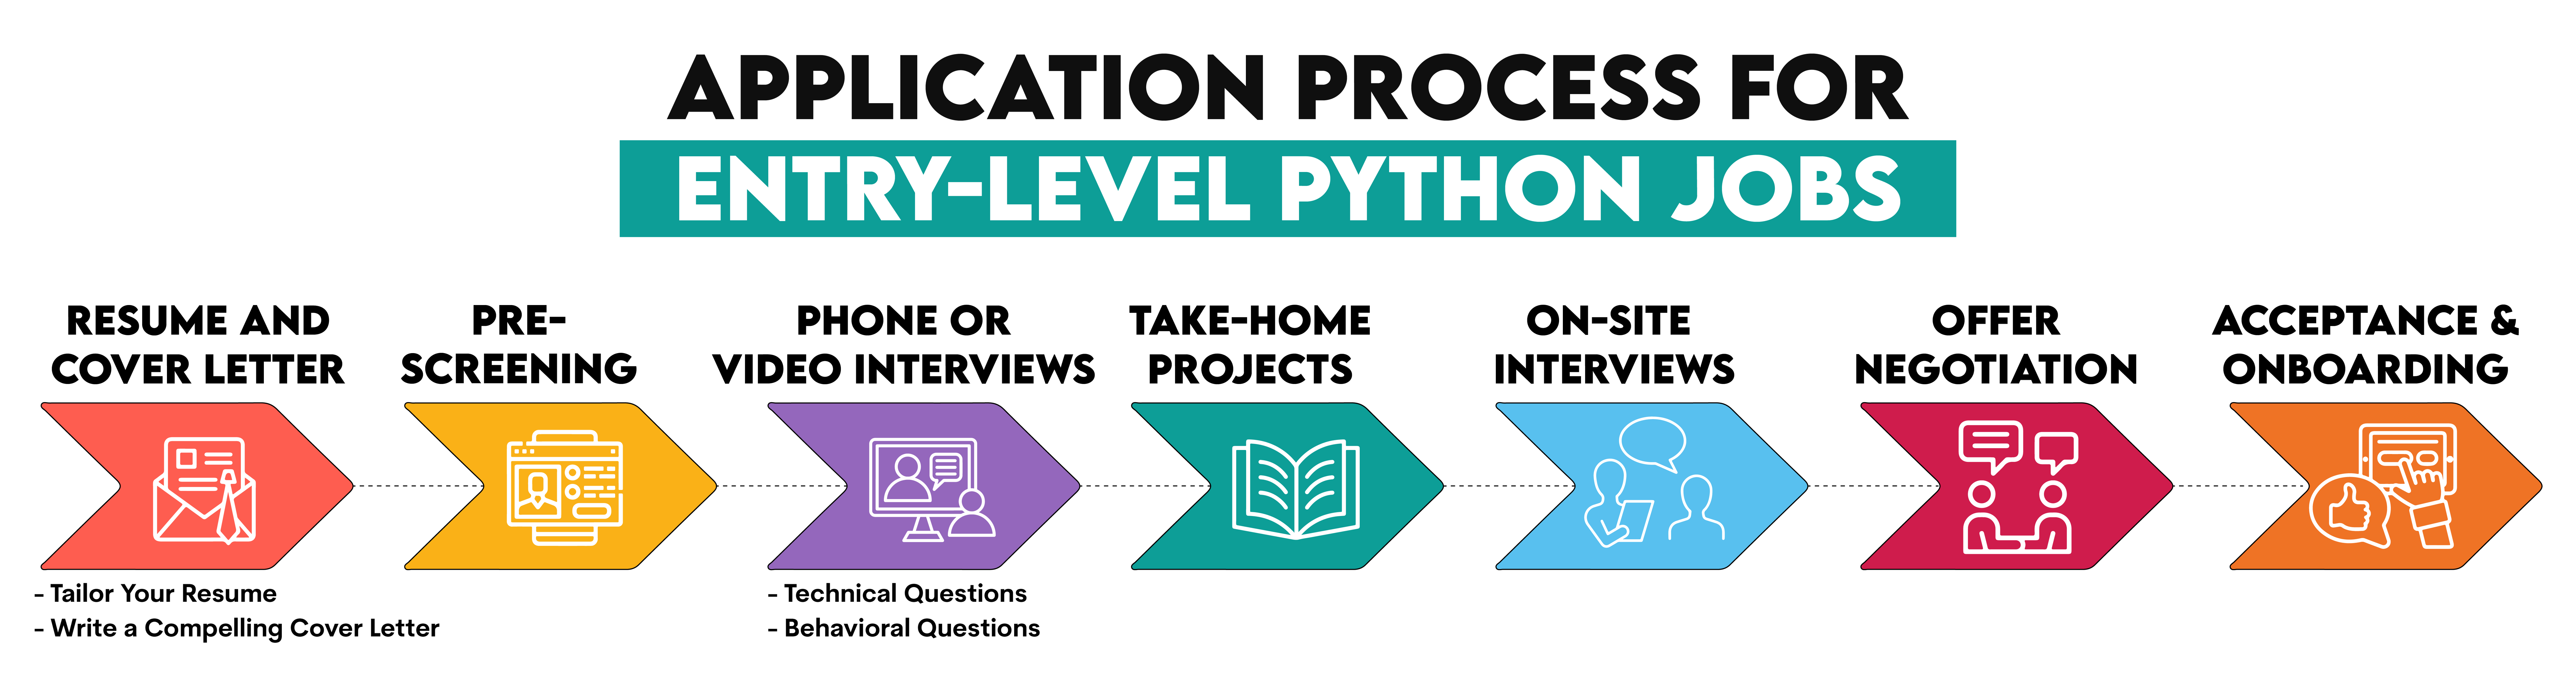 Application Process for Entry-Level Python Jobs